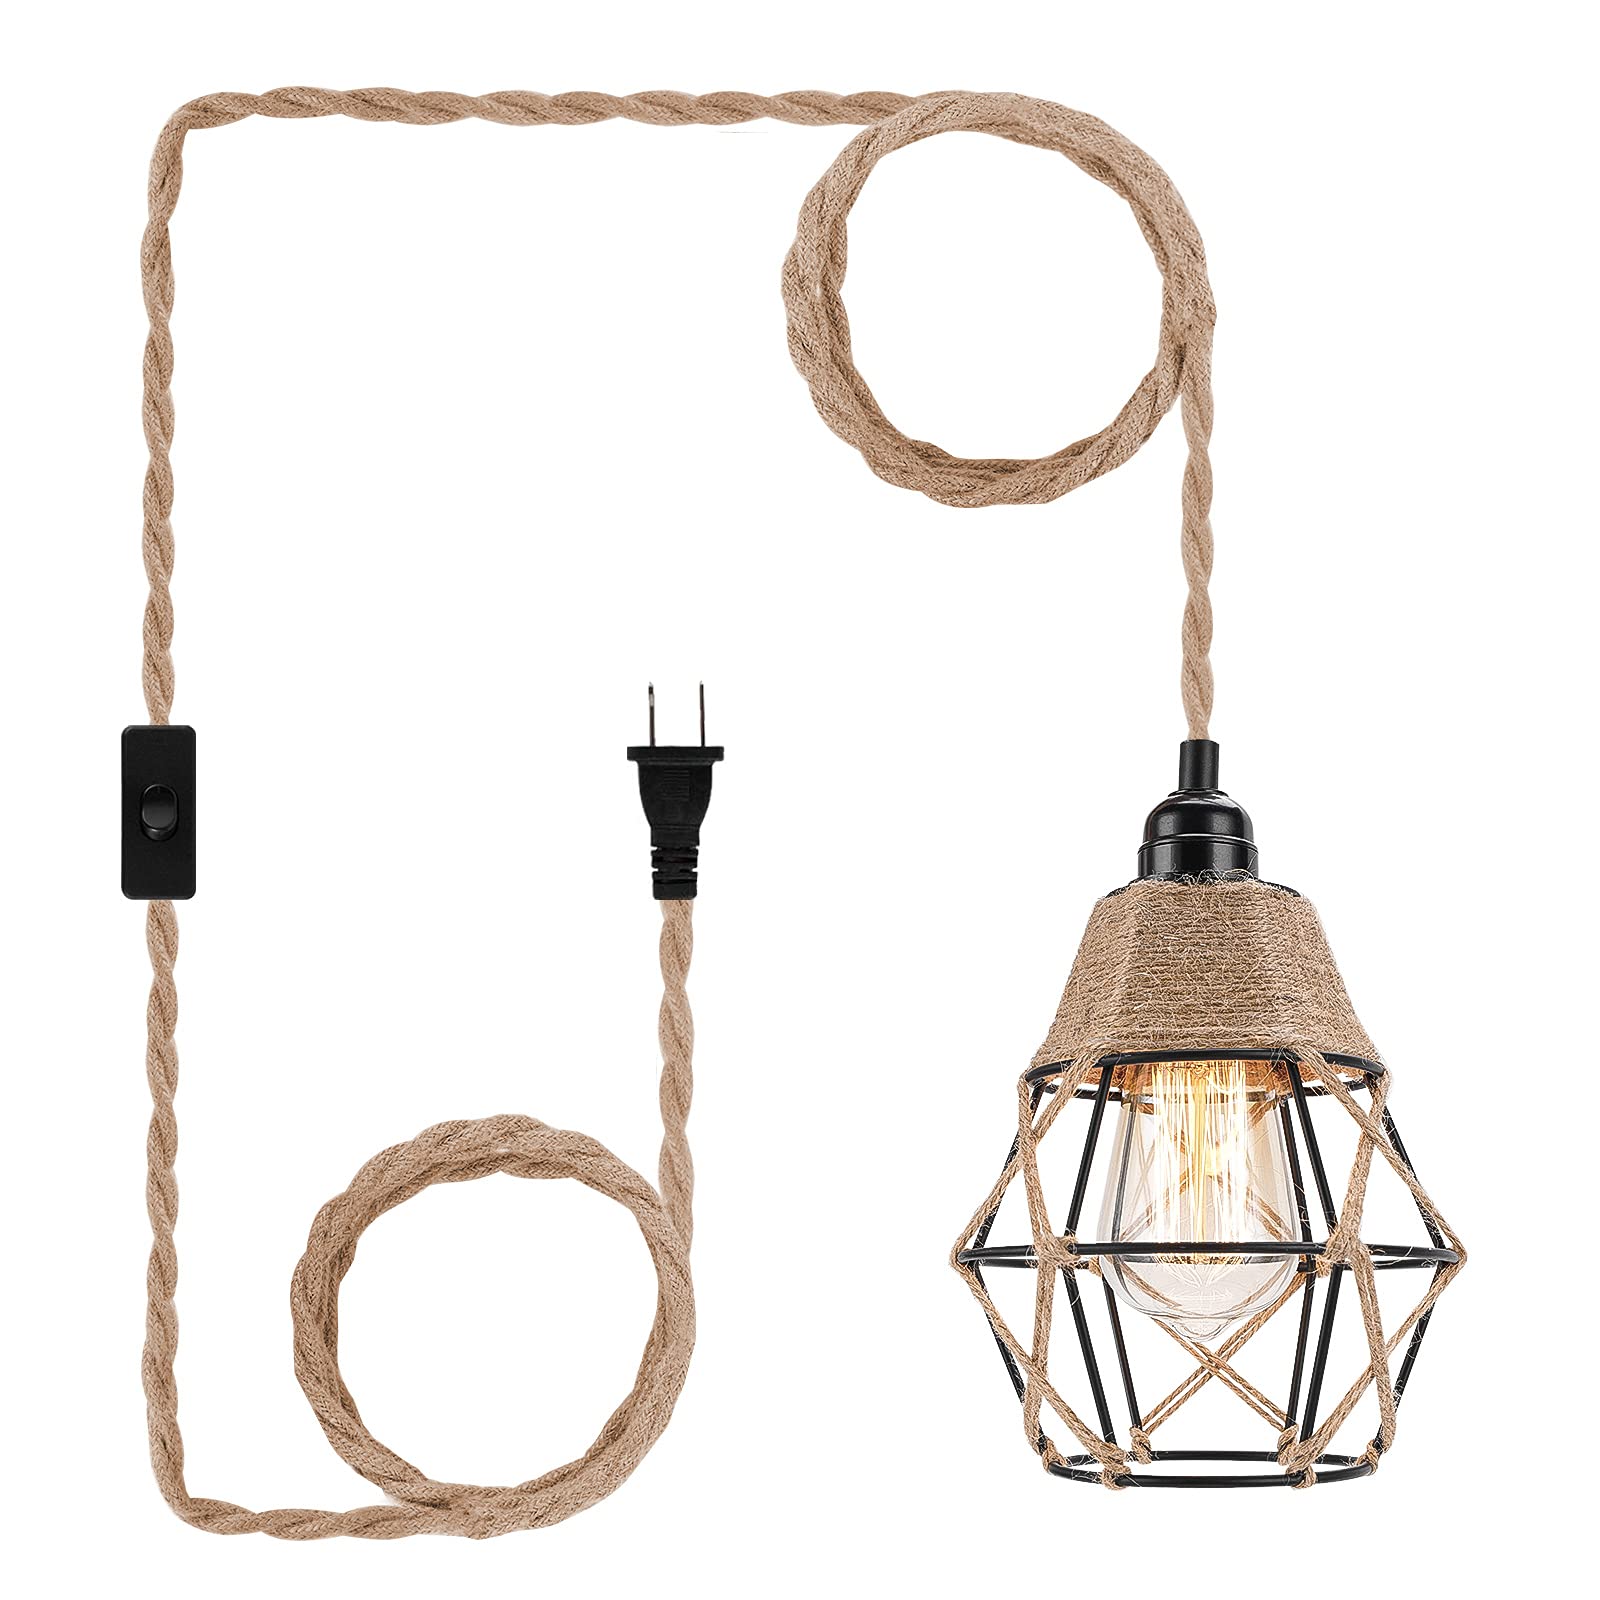 Industrial Plug in Pendant Light - 16.4ft Hanging lights with Plug In Cord Hemp Rope Hanging Lamp Farmhouse Hanging Light Fixtures with On/Off Switch for Kitchen Island Bedroom Living Room